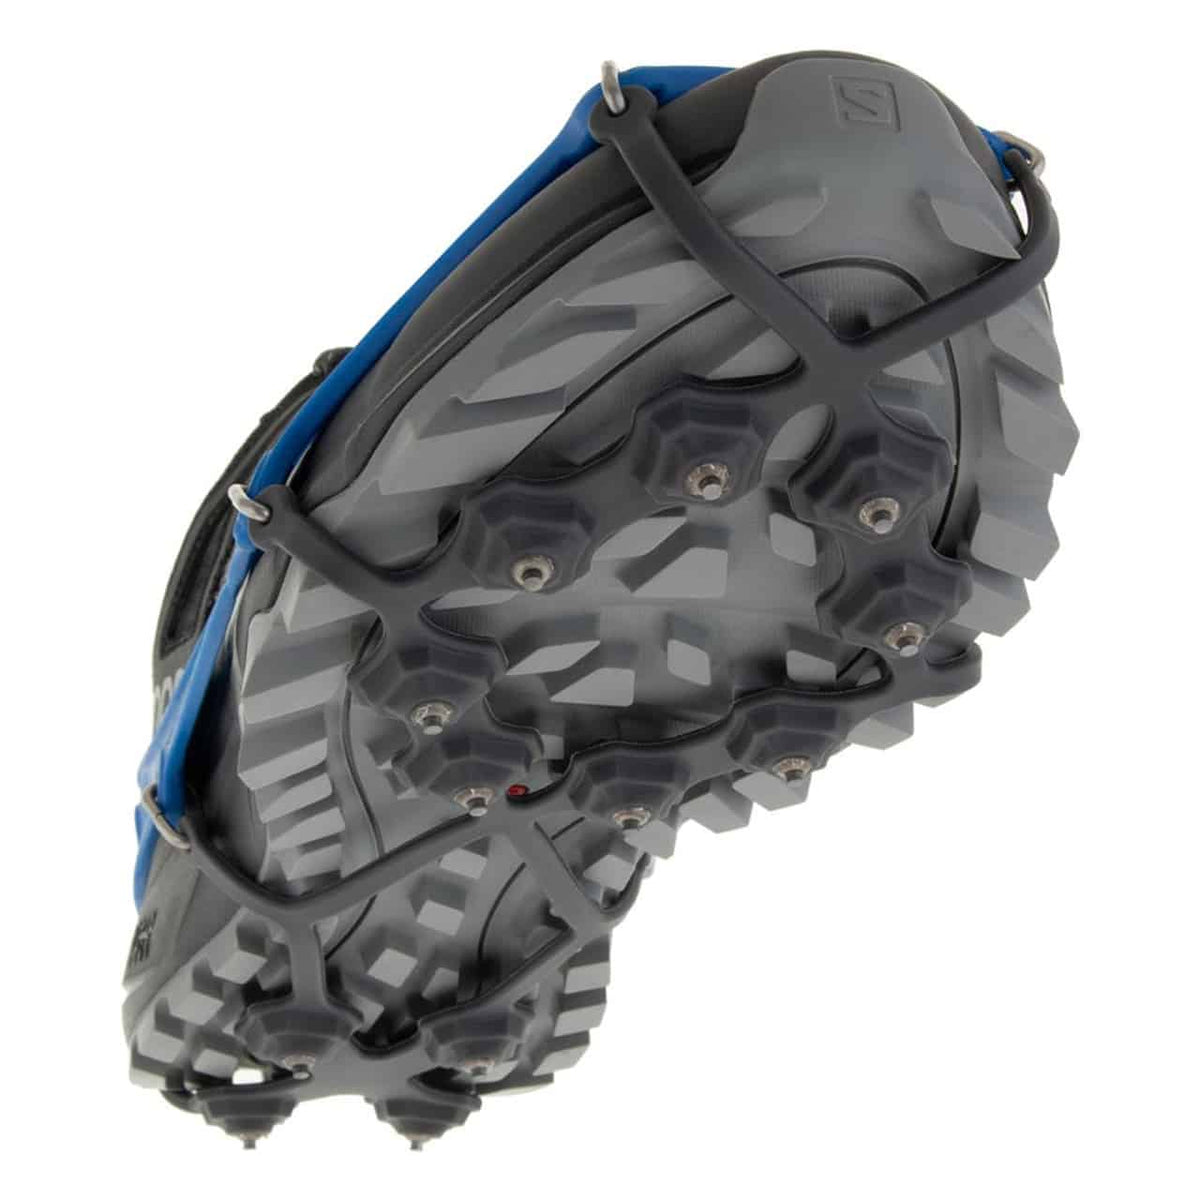 kahtoola Exospikes Blue Winter hiking traction spikes front stud details